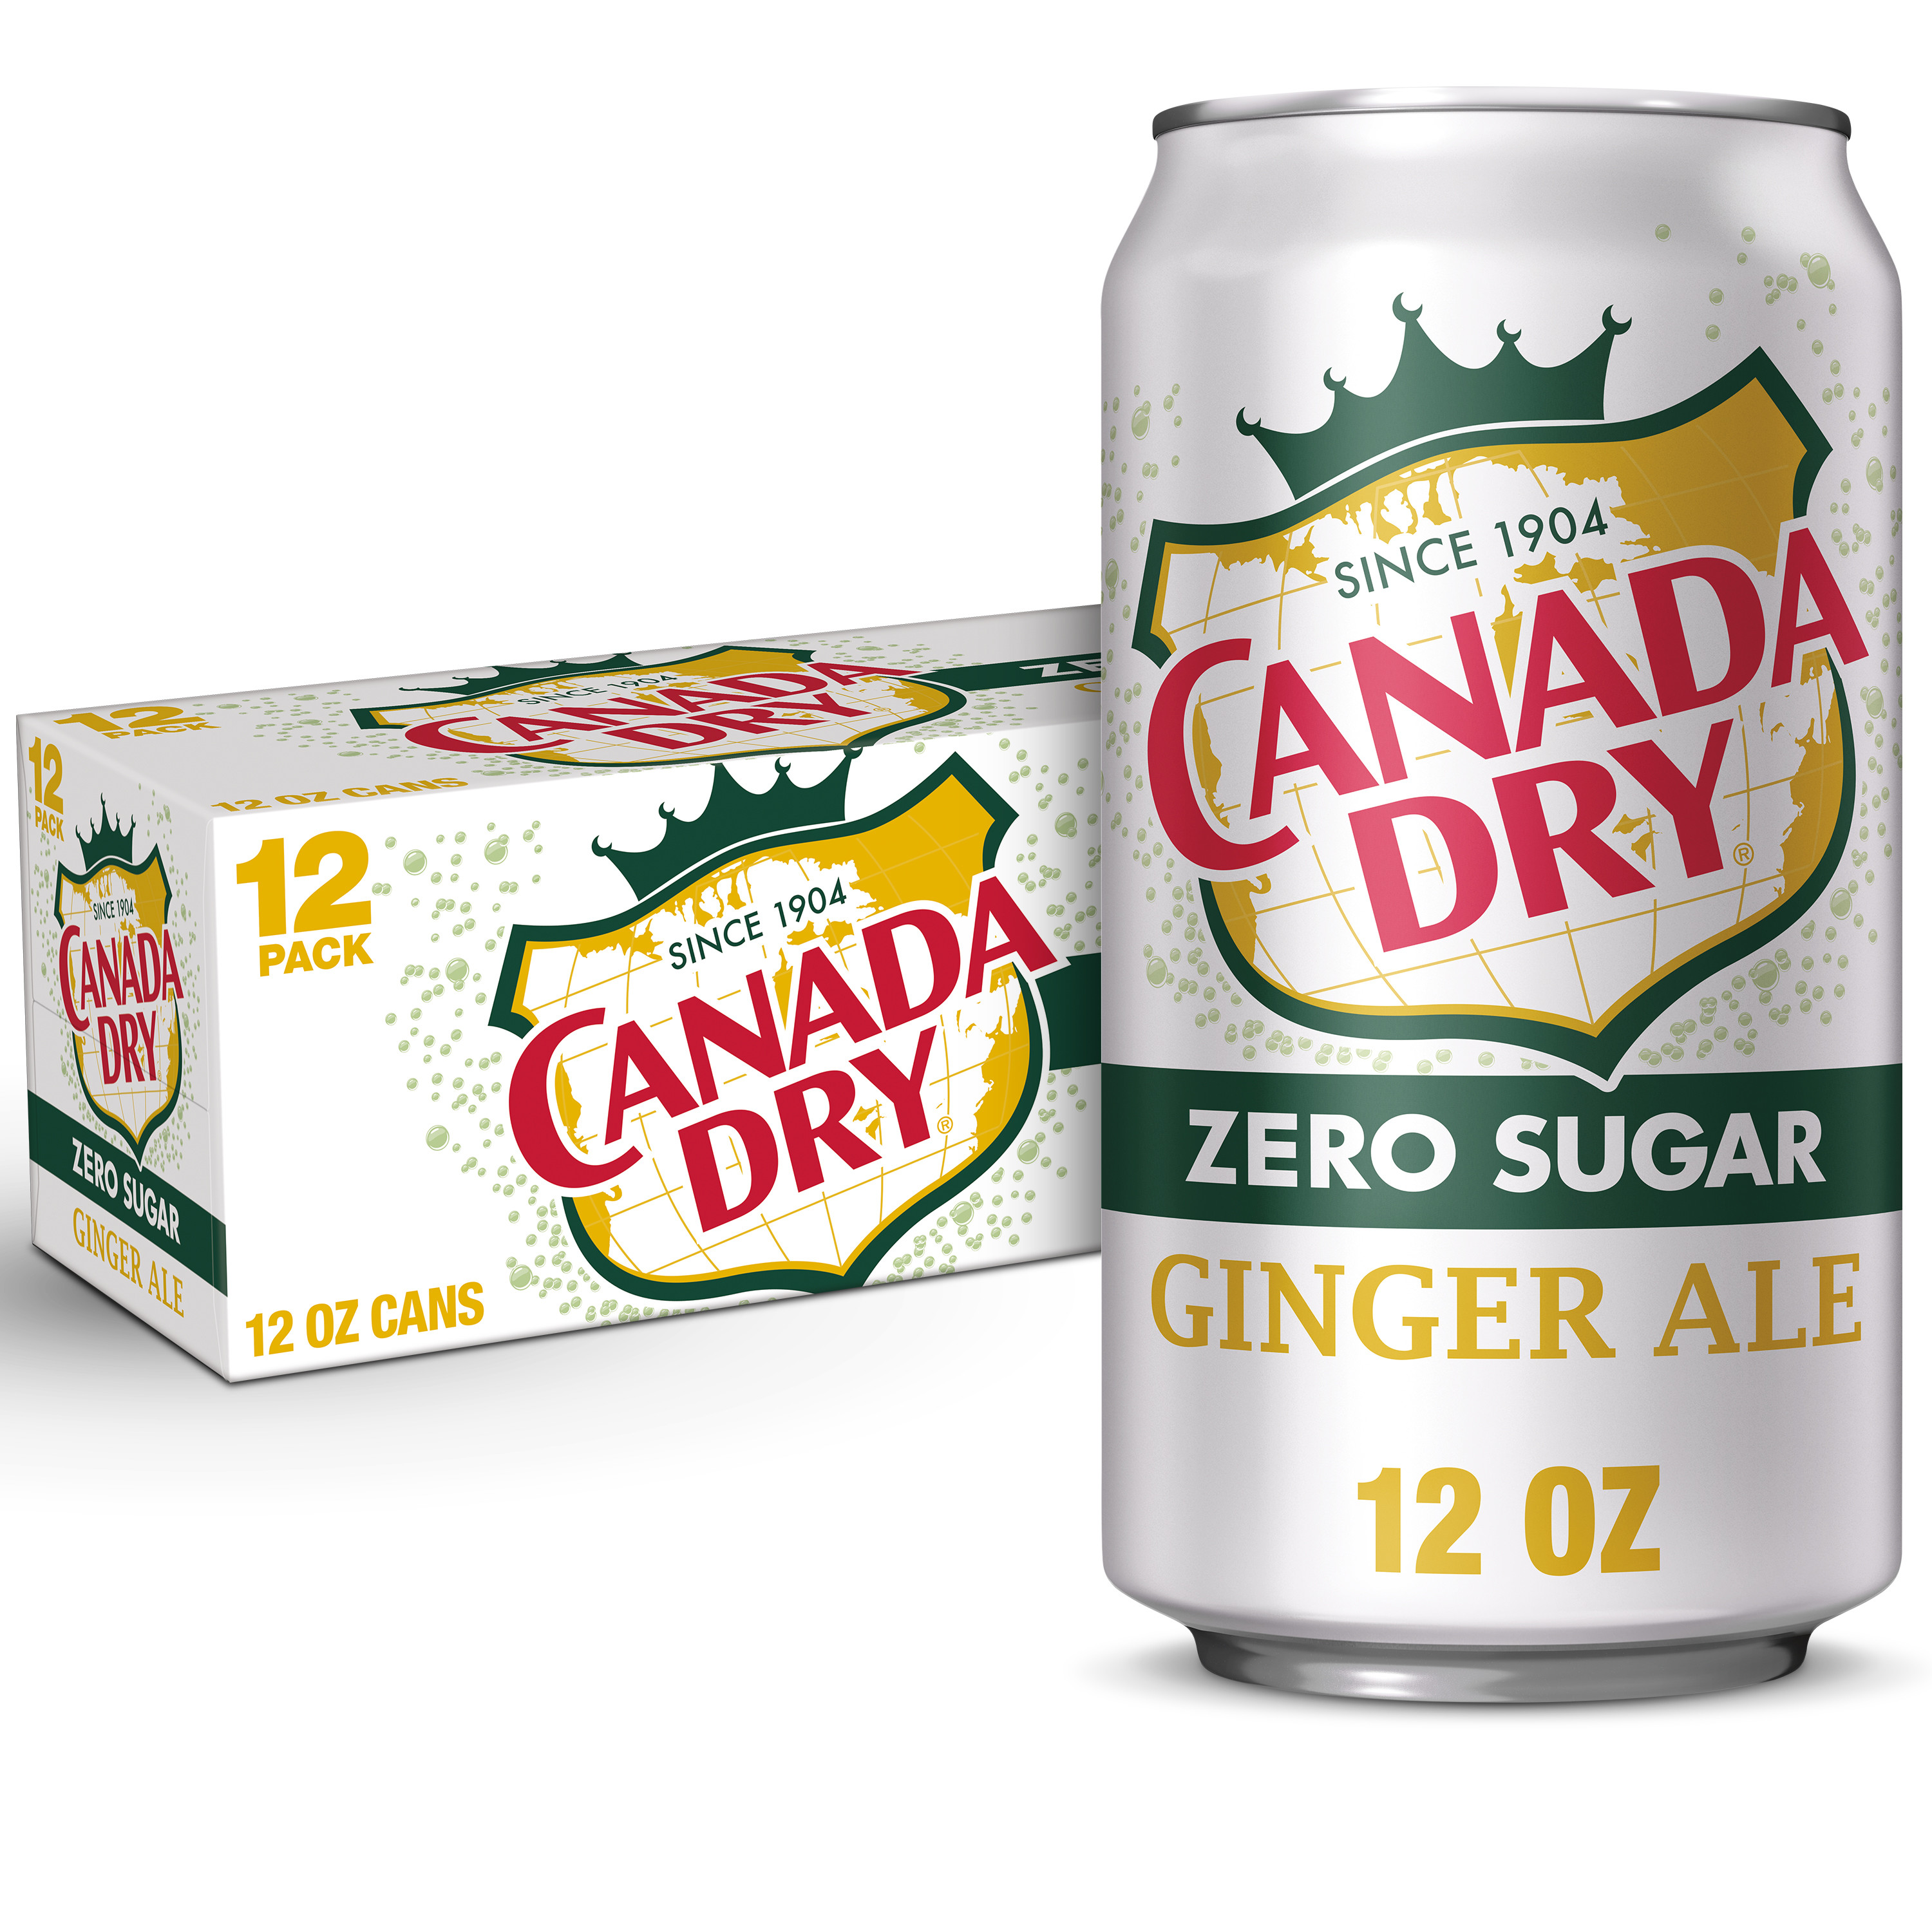 Canada Dry Zero Sugar Ginger Ale Soda Pop, 12 fl oz, 12 Pack Cans - image 1 of 13